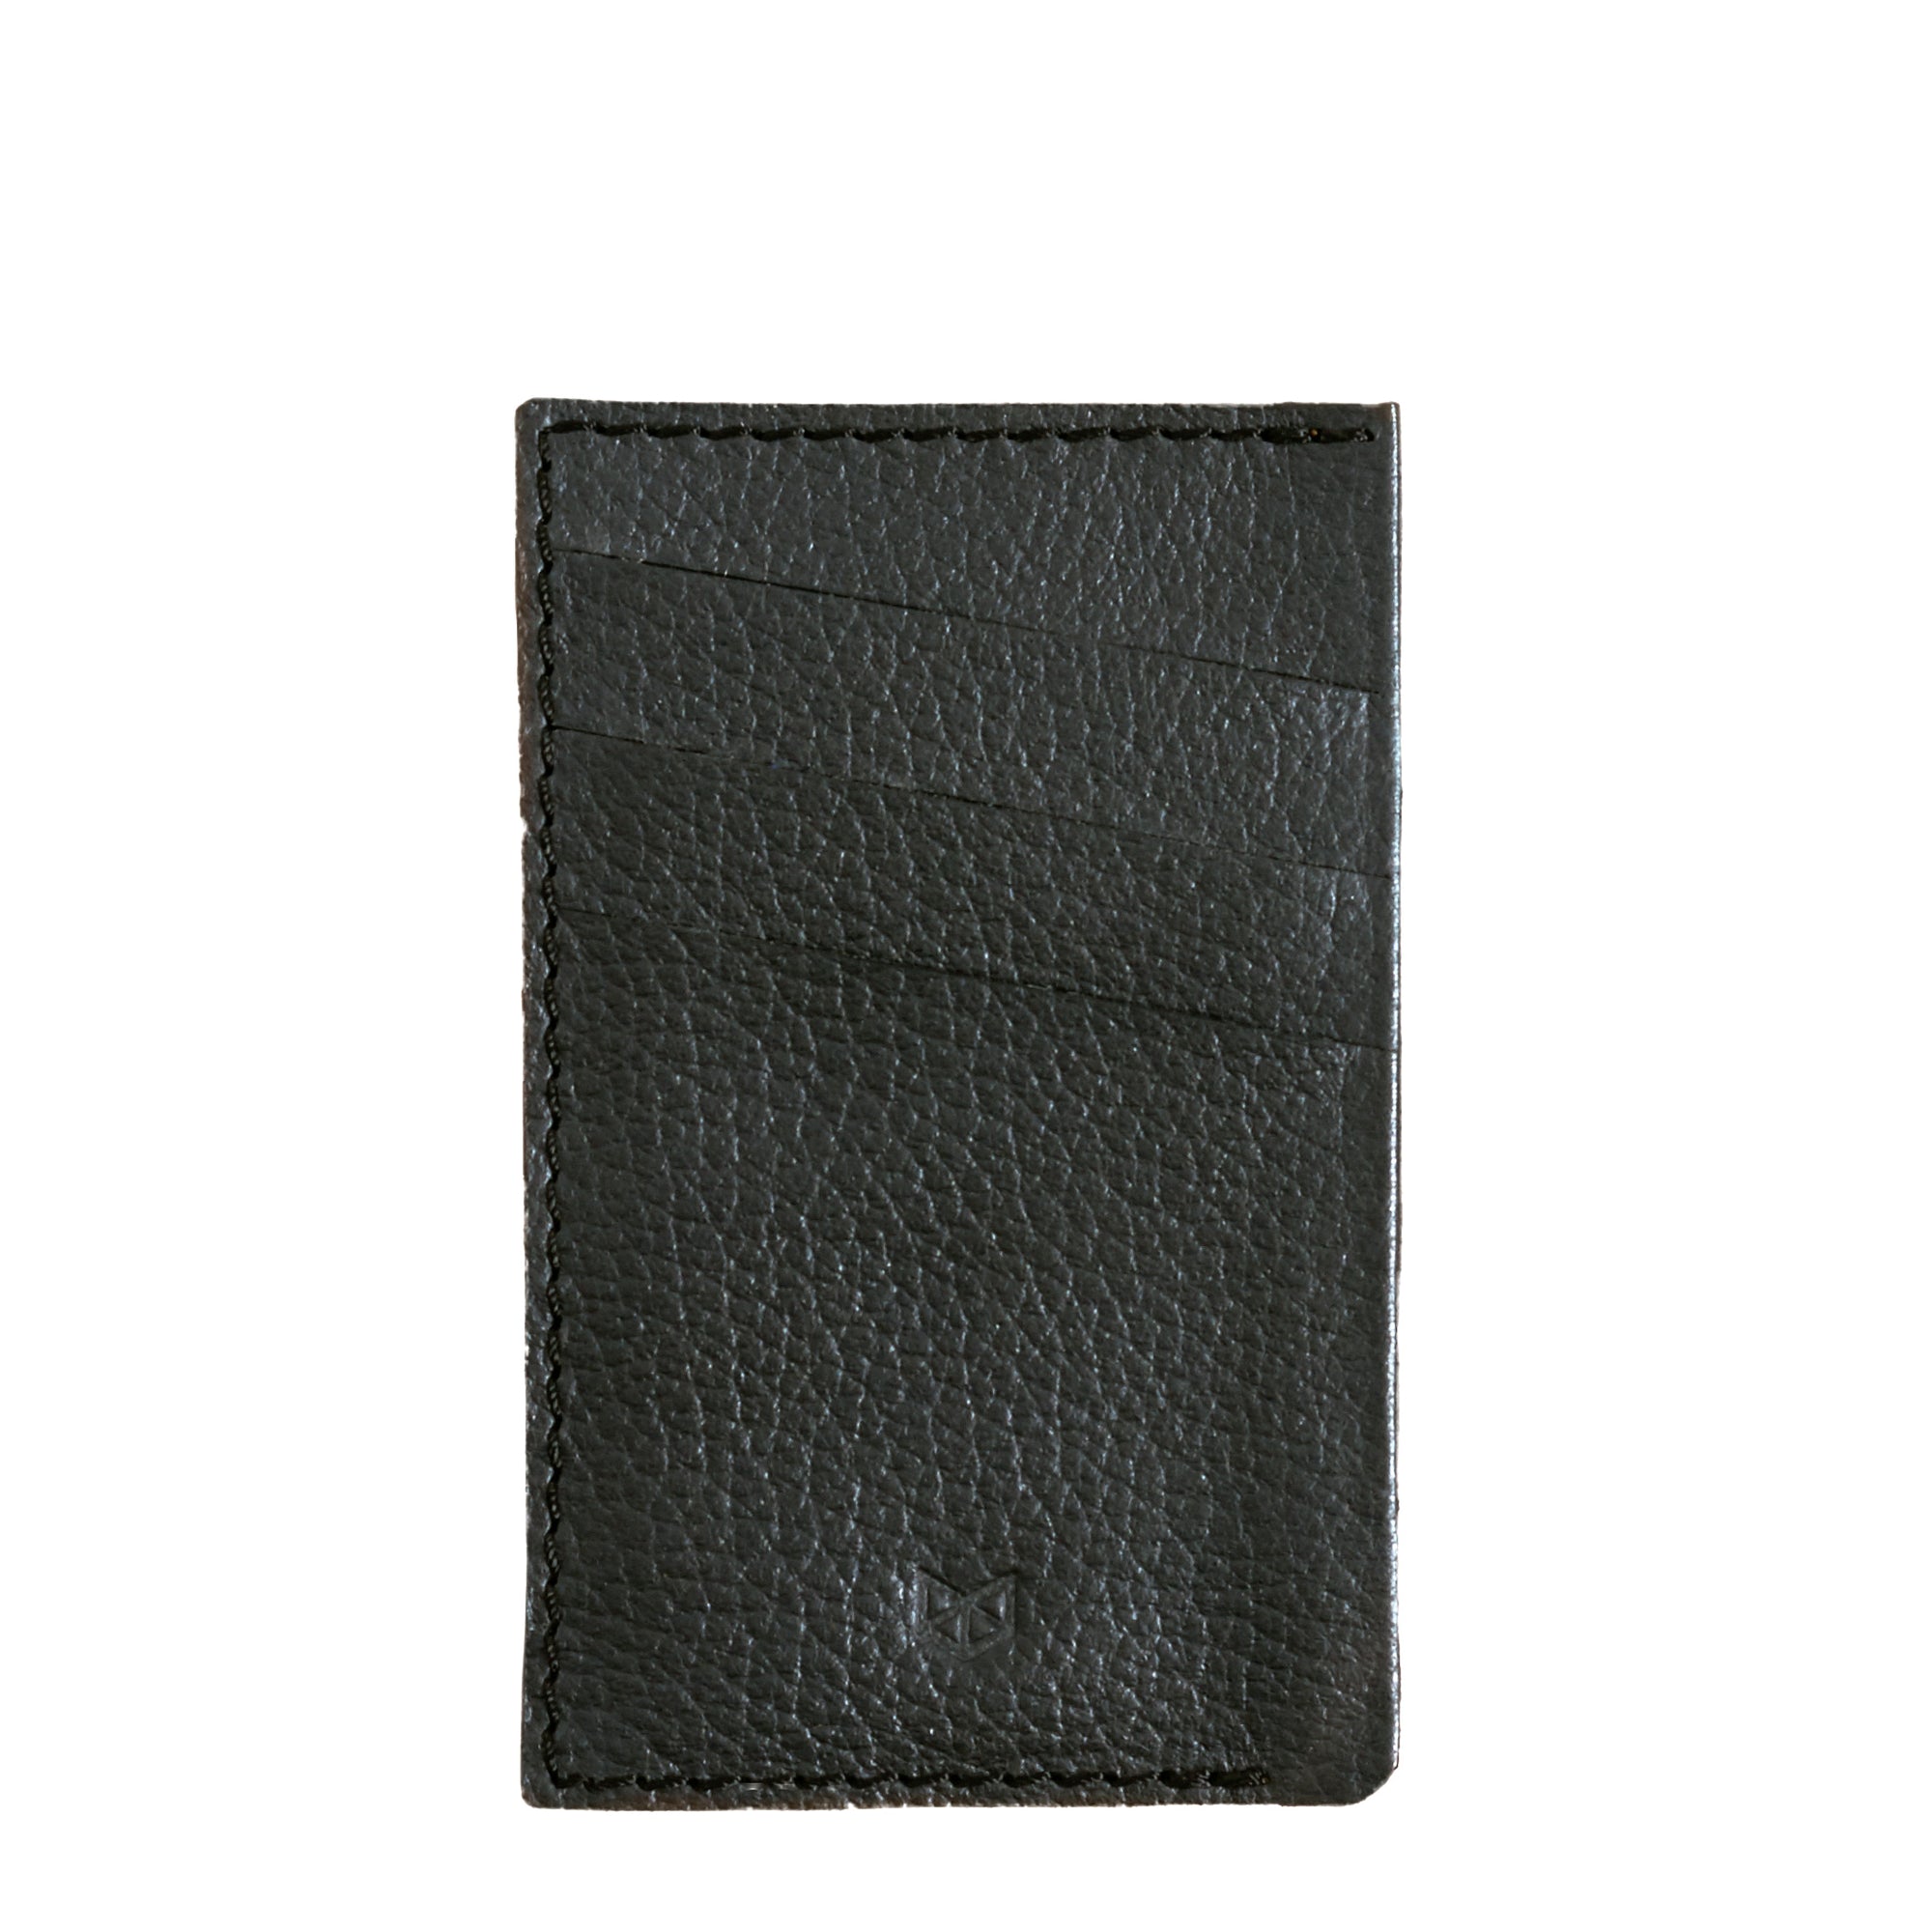 Front Cover. Card Holder Wallet Black by Capra Leather